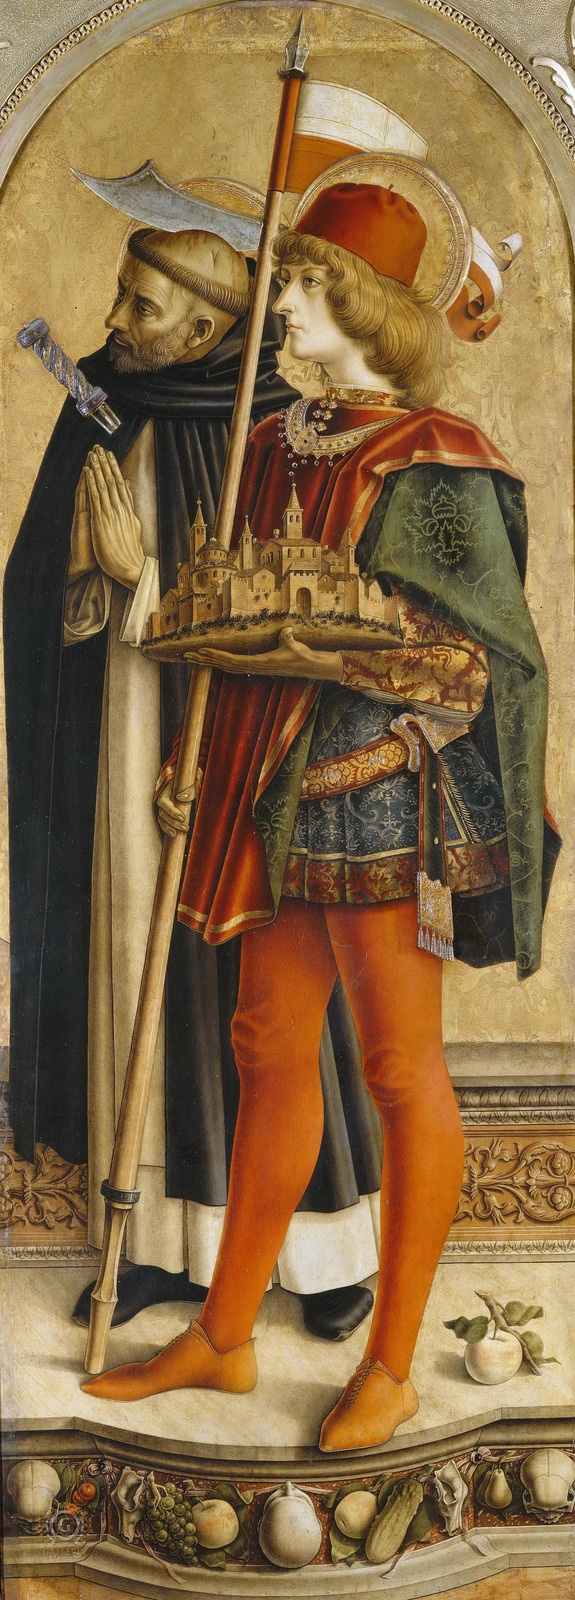 Carlo Crivelli. Saint Peter the Martyr and Saint Venezian of Kaerinsky. Altar Triptych Camerino, right wing